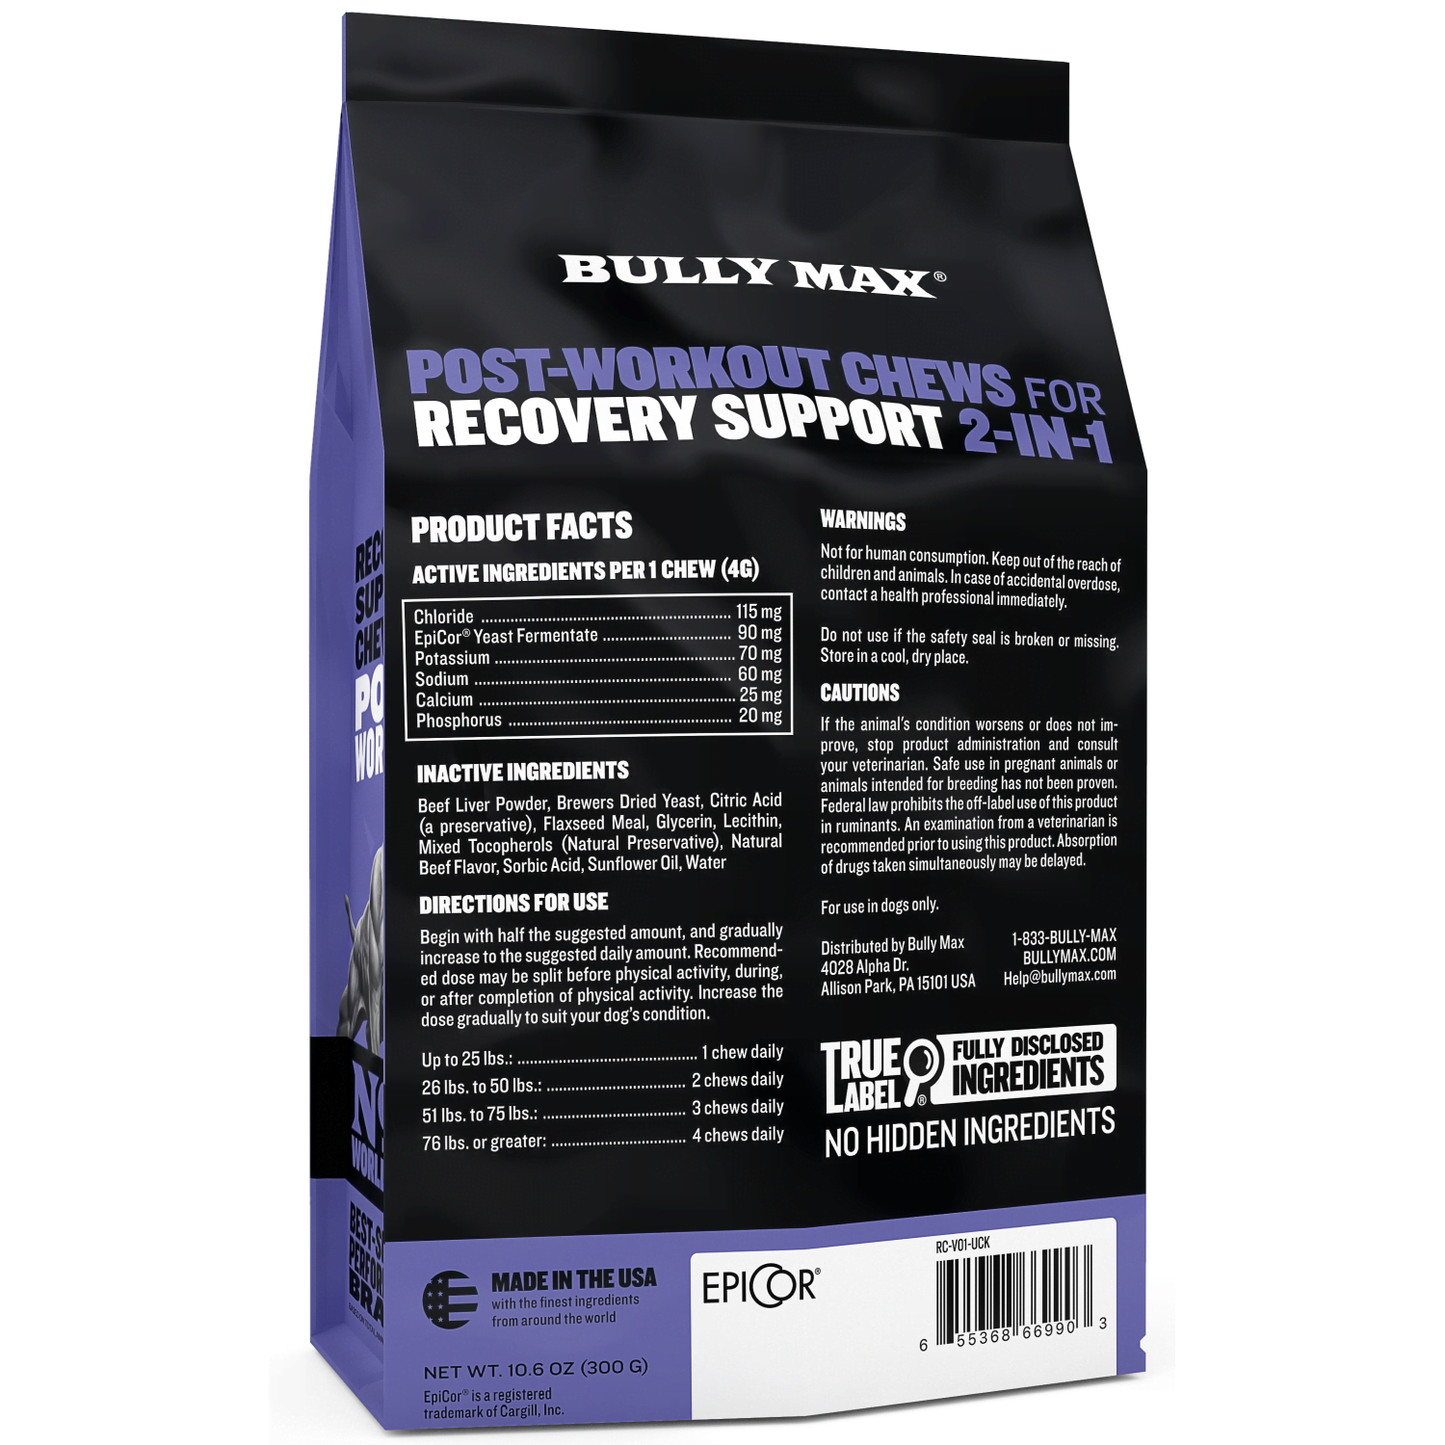 Bully Max Recovery Support Chews for Post Workout